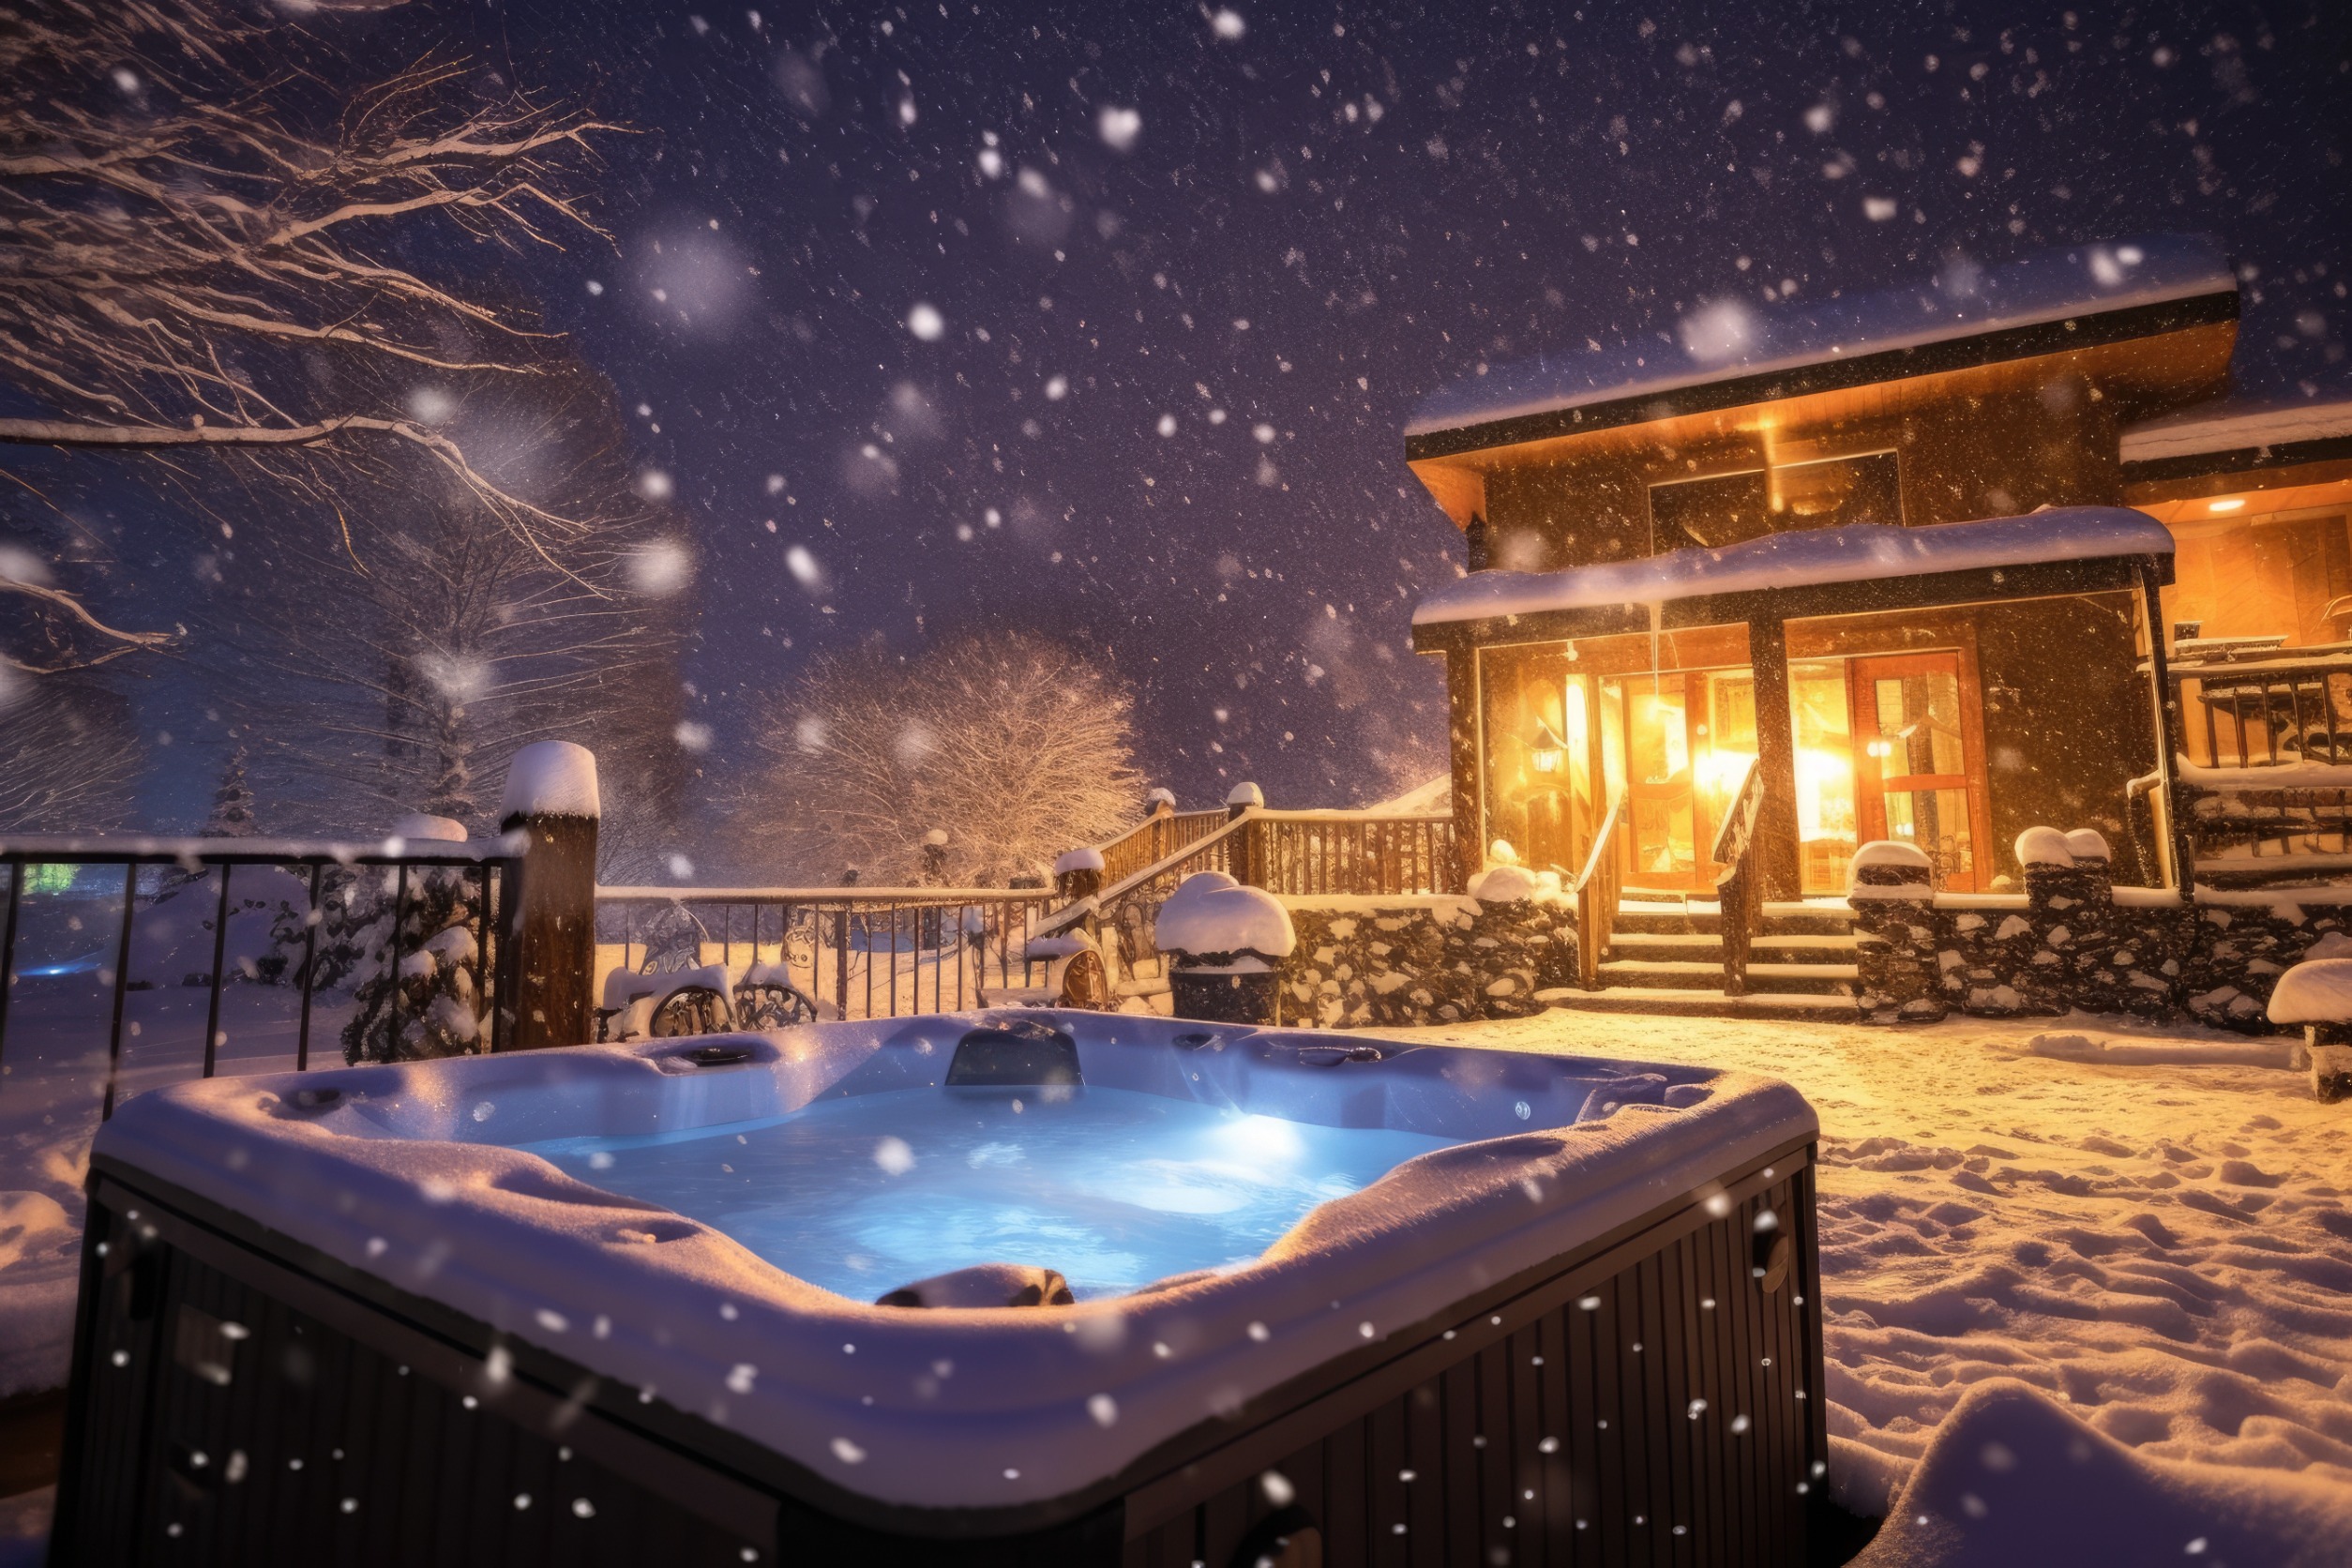 Owning a Hot Tub in the Dead of Winter